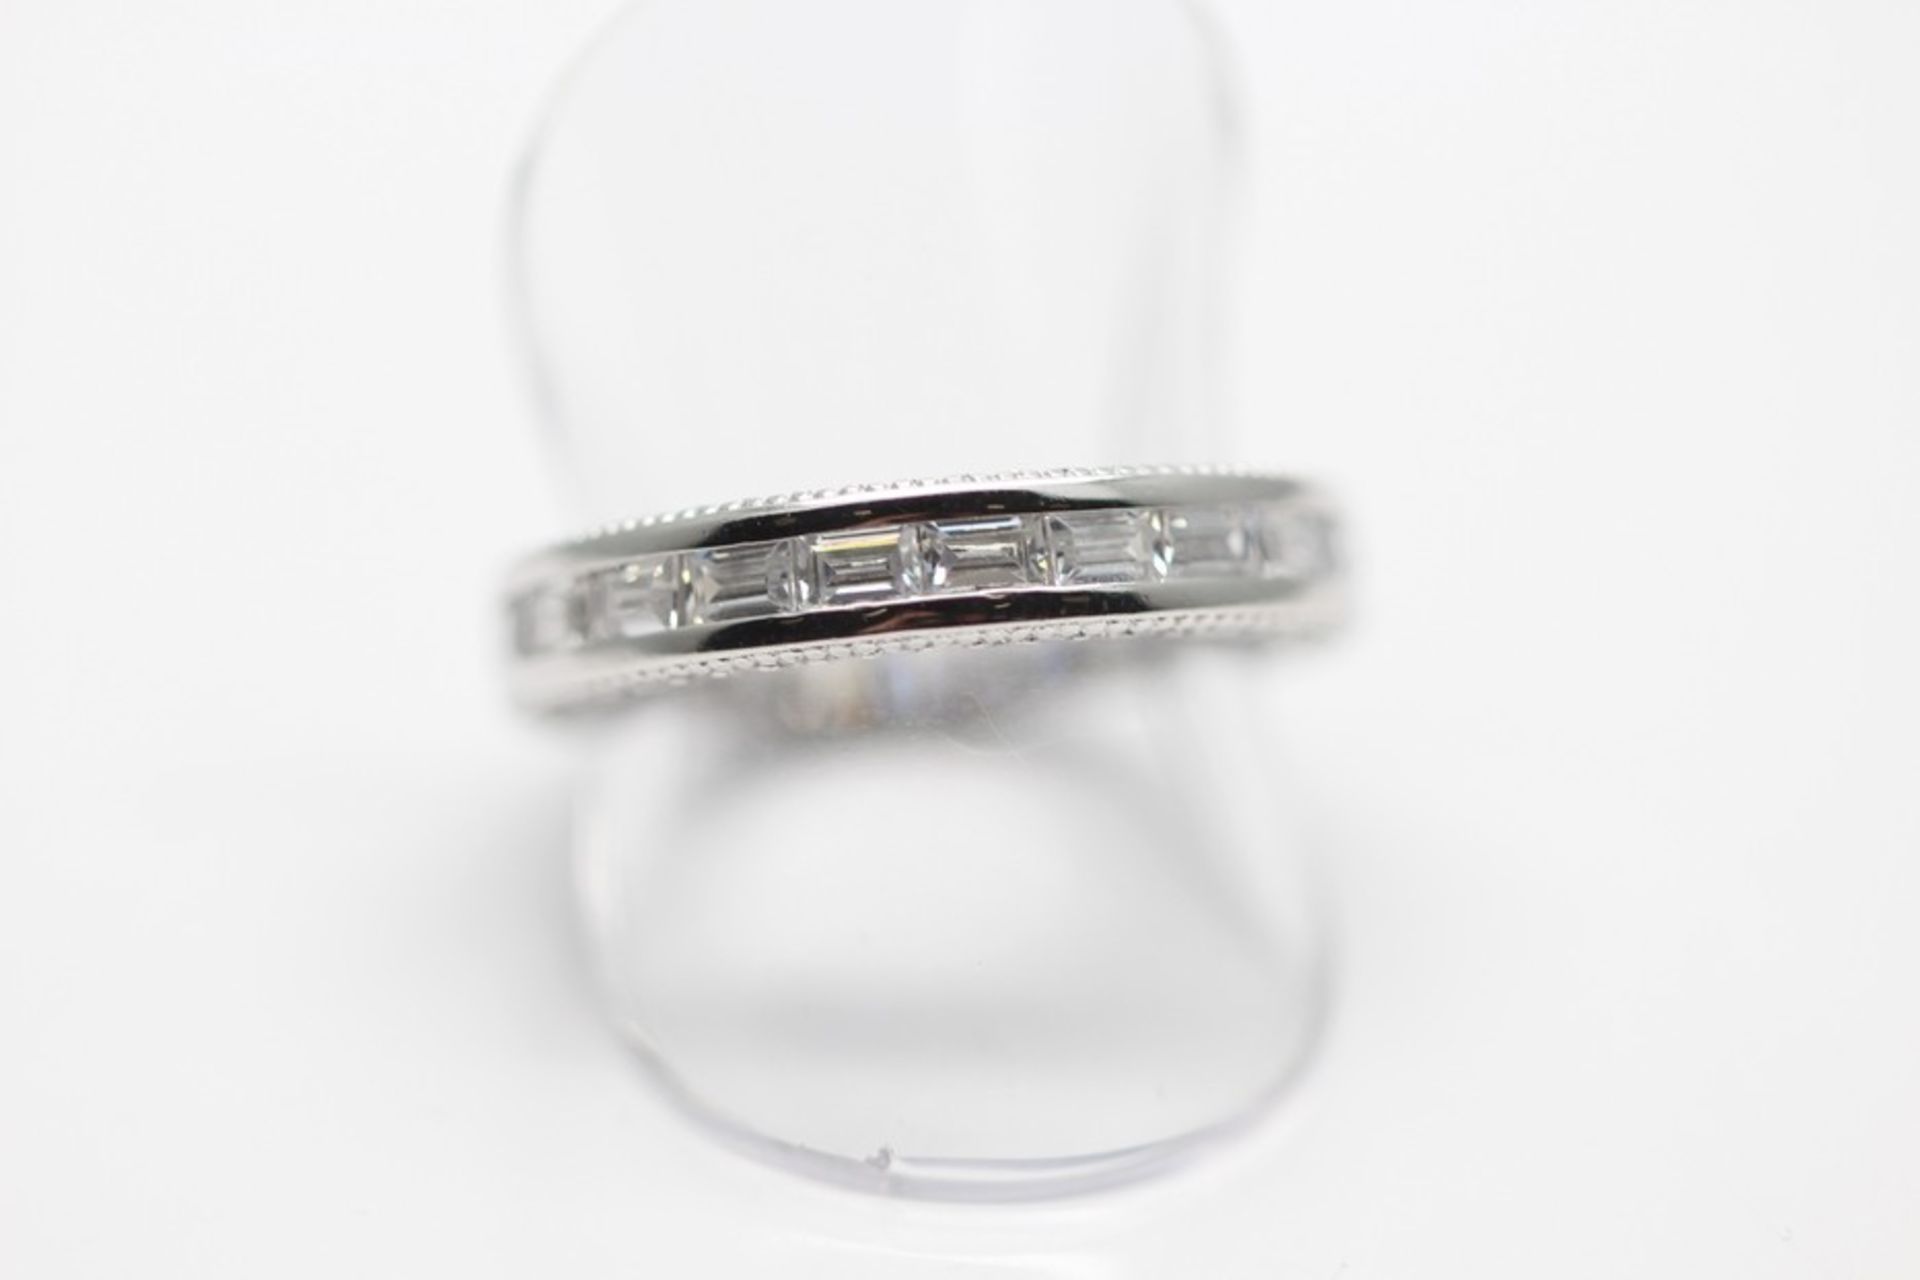 1 x BOXED BRAND NEW SOLID SILVER LADIES FULL ETERNITY RING SET WITH AAA+ SIMULATED DIAMONDS (PV-